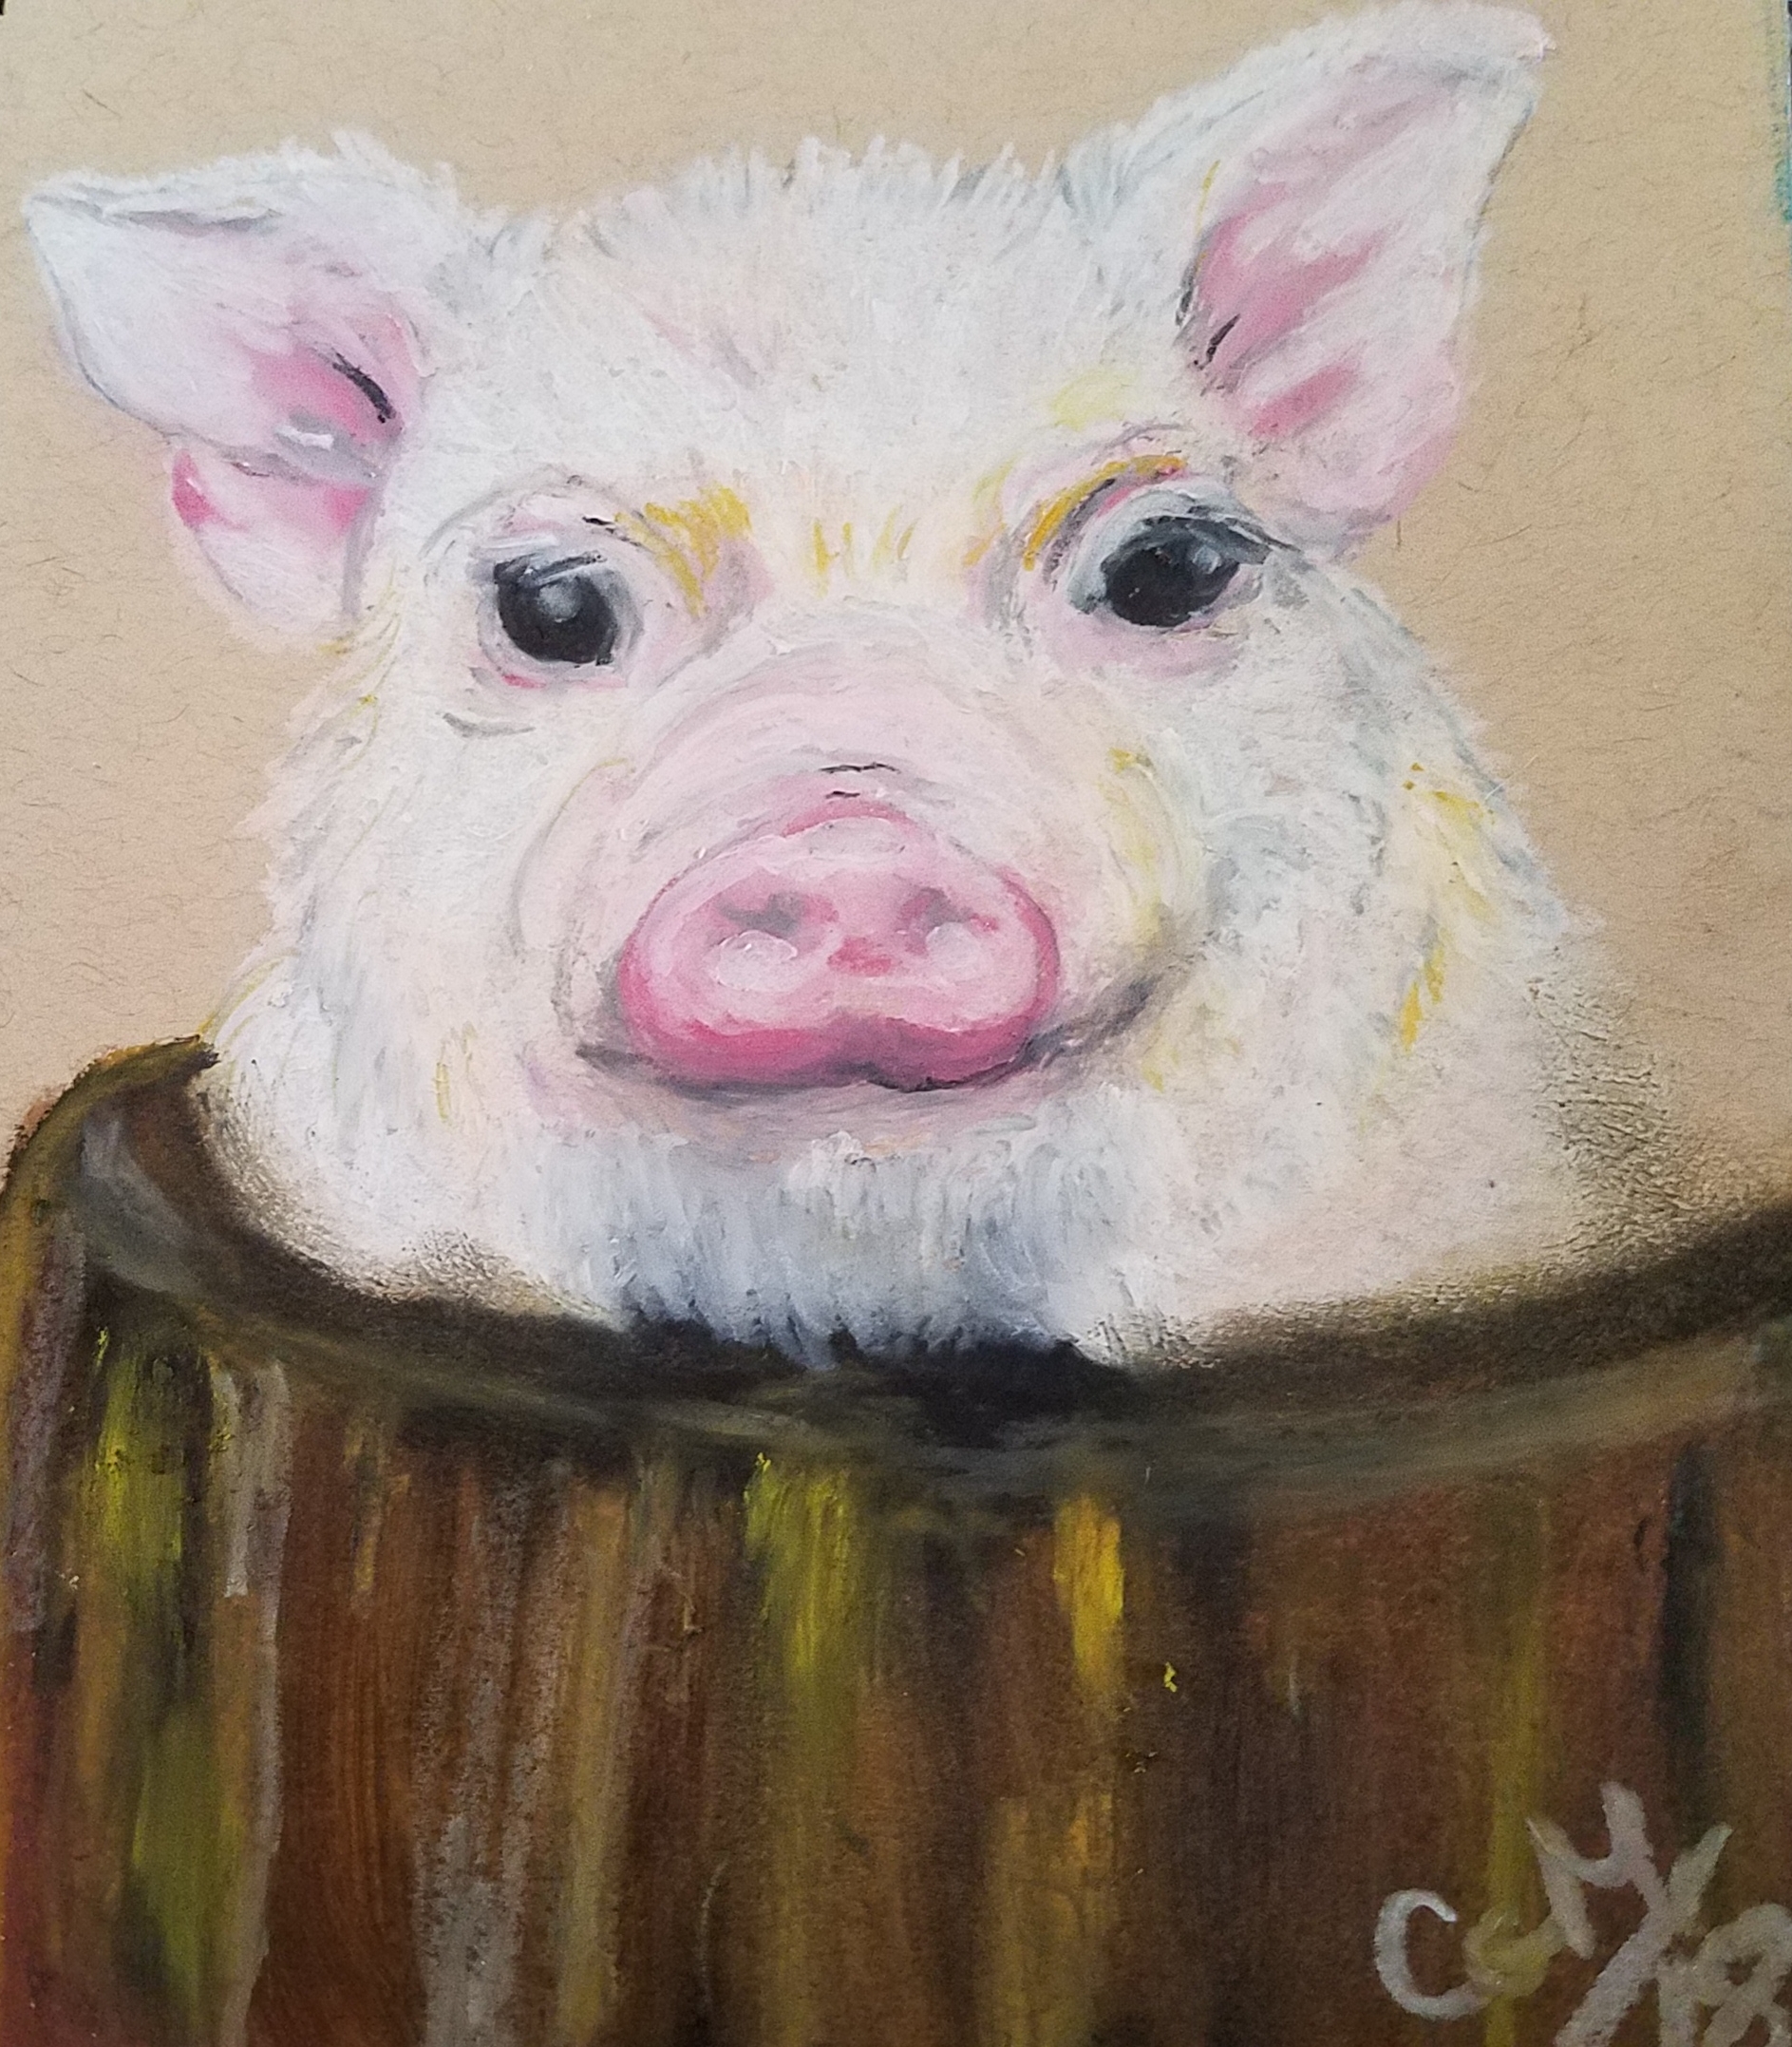 "Little Pig" by Crystal G. Mills